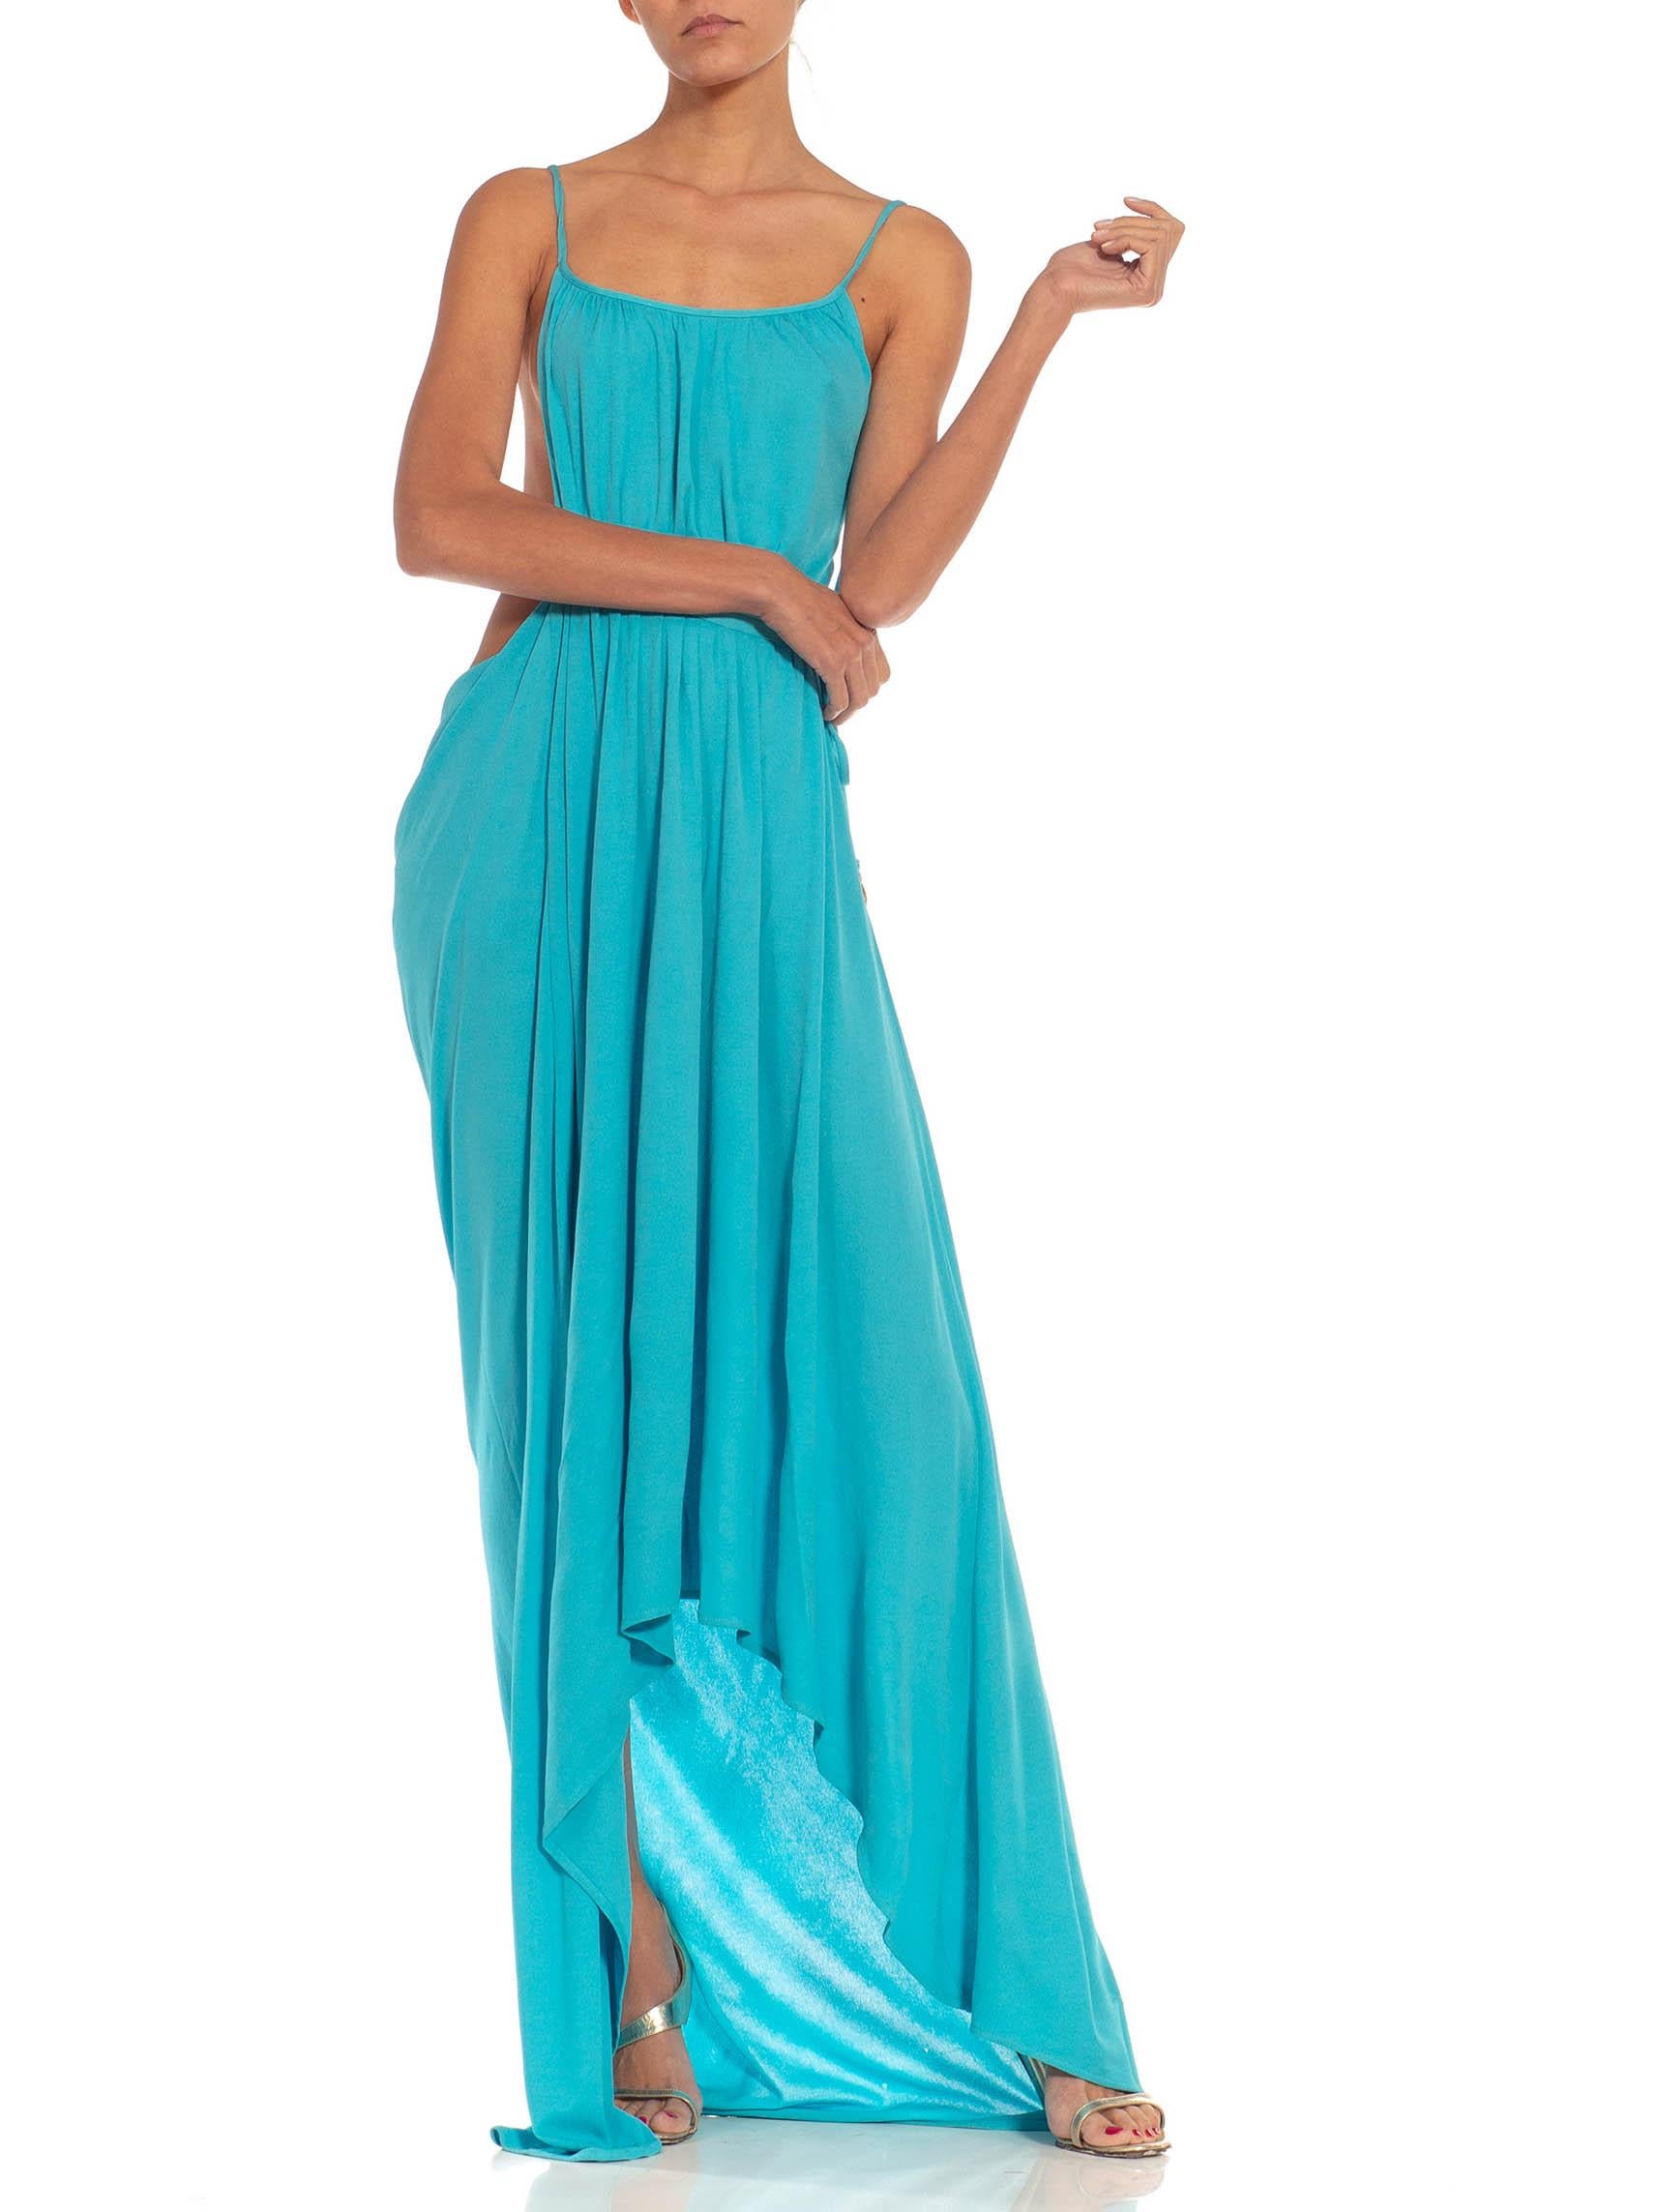 MORPHEW COLLECTION Light Blue Silk Blend Backless Gown In Excellent Condition For Sale In New York, NY